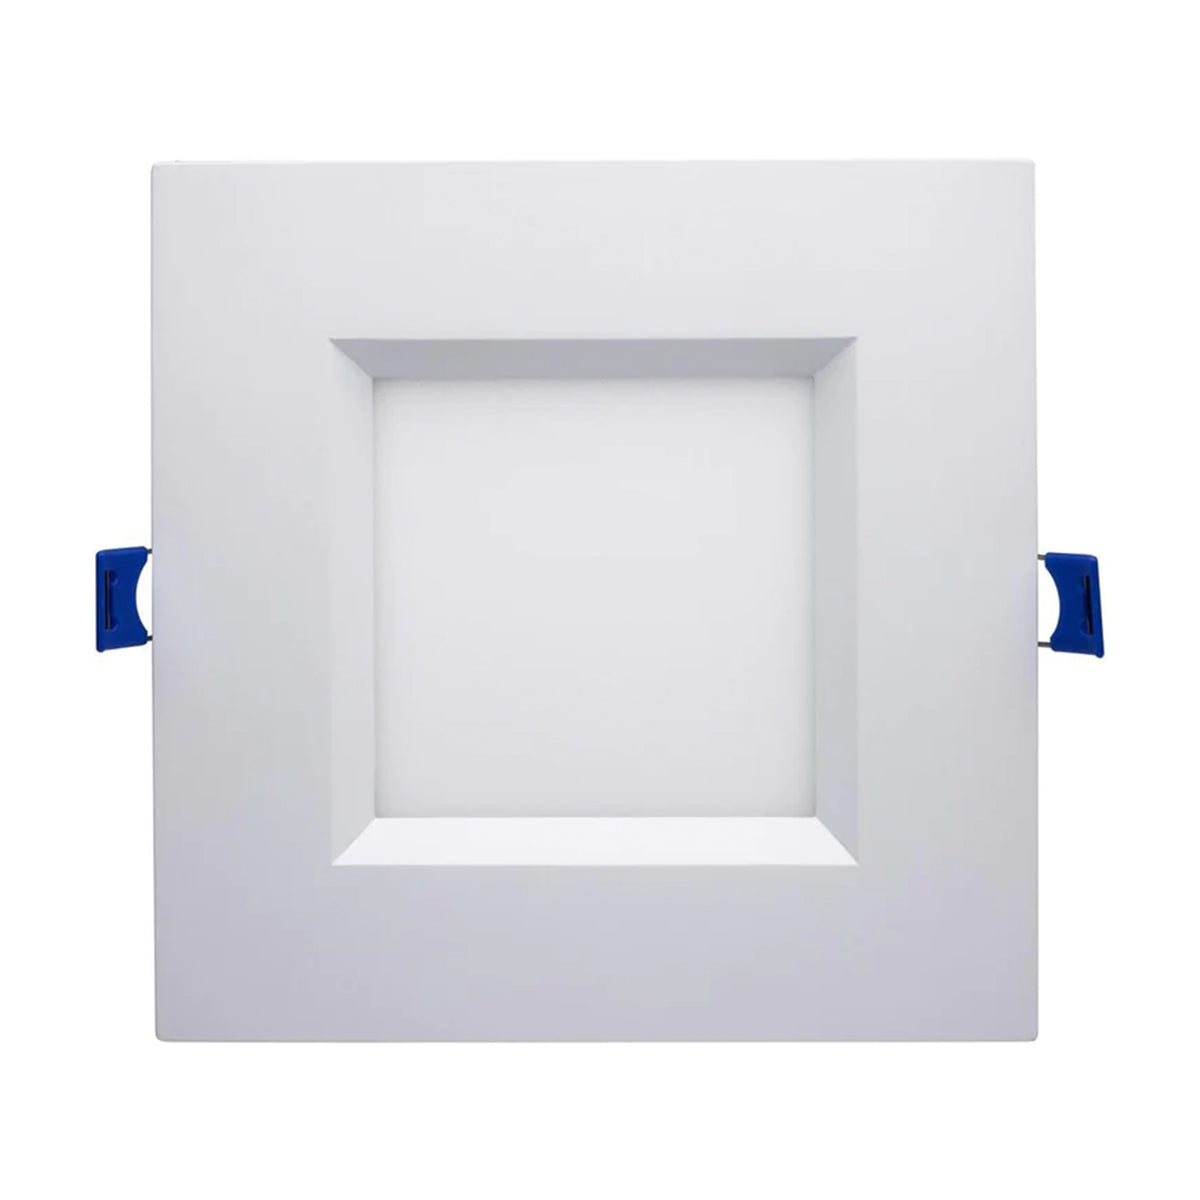 Satco Starfish, Smooth Baffle, 6 inch, Square Smart Canless LED Recessed Light, 12 Watt, 750 Lumens, Selectable CCT 2000K to 5000K RGB/Tunable White